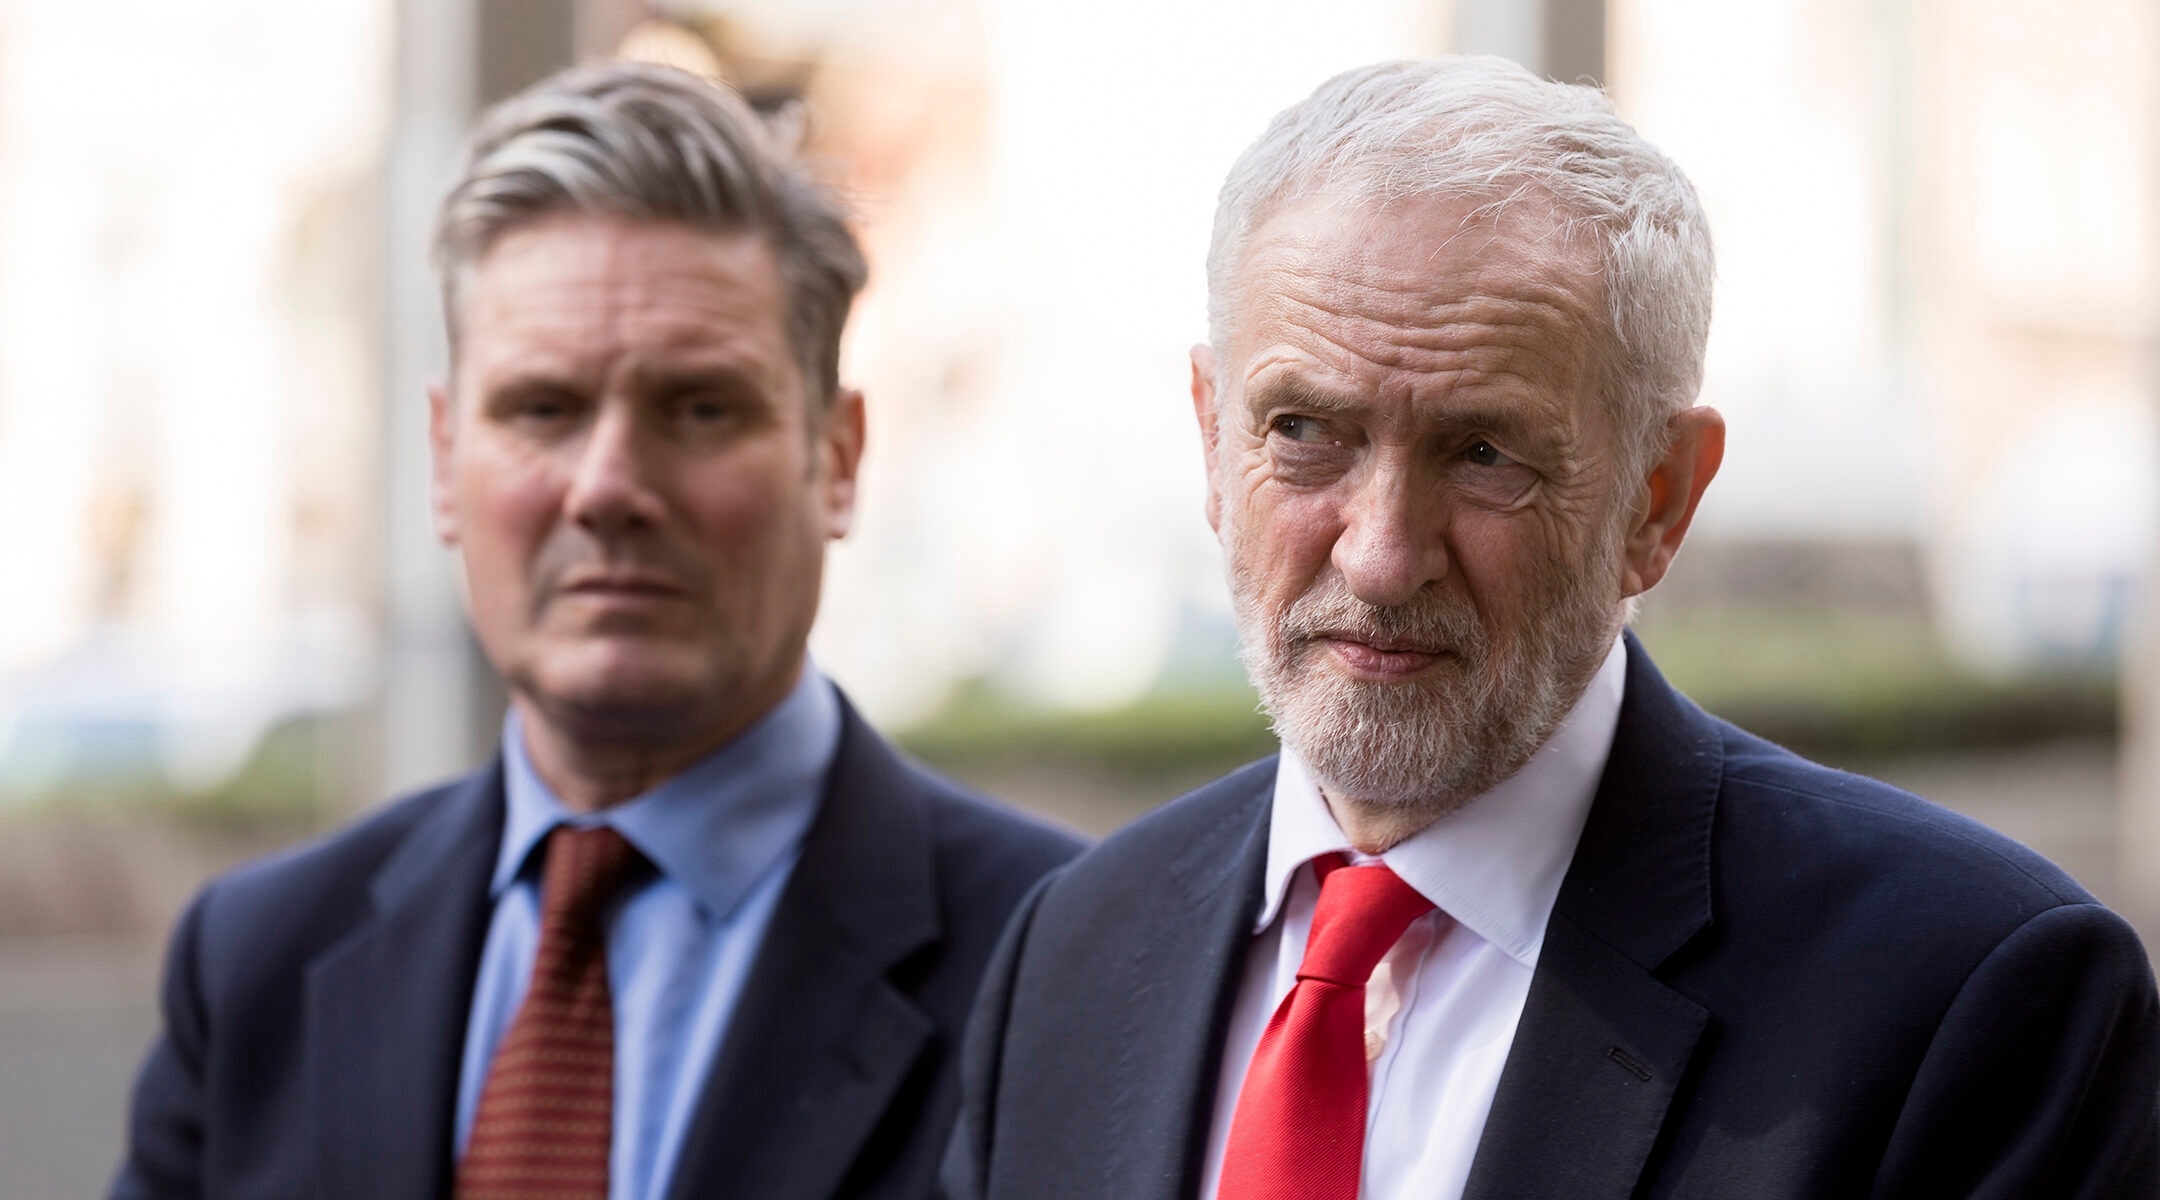 Former Labour leader Jeremy Corbyn, right, and his successor Keir Starmer talk to journalists in Brussels, Belgium on March 21, 2019. (Thierry Monasse/Getty Images)